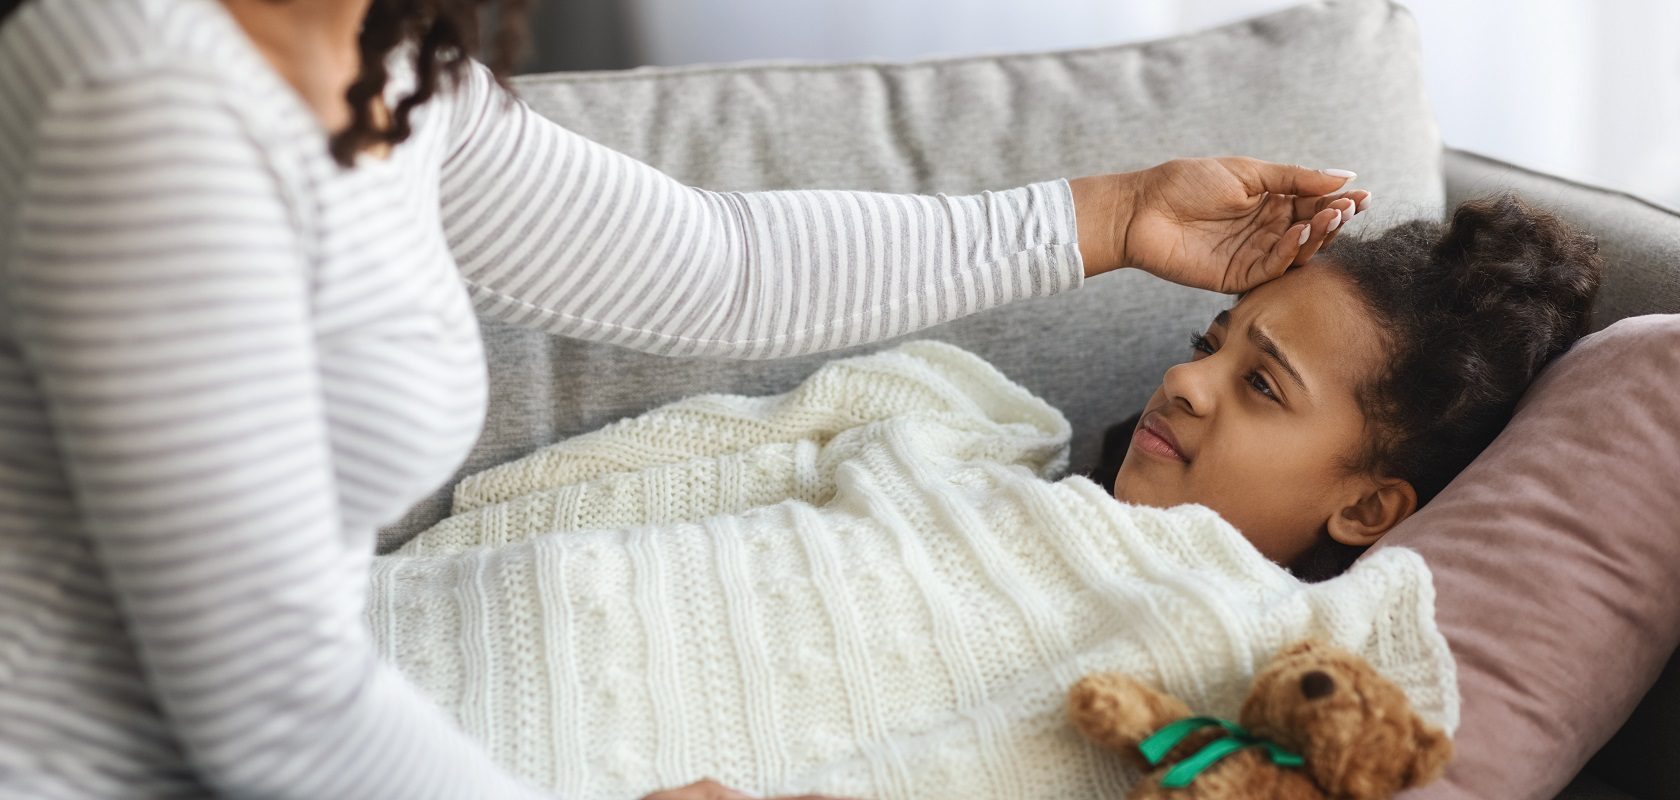 5 Tips to help combat the symptoms of colds and flu this winter